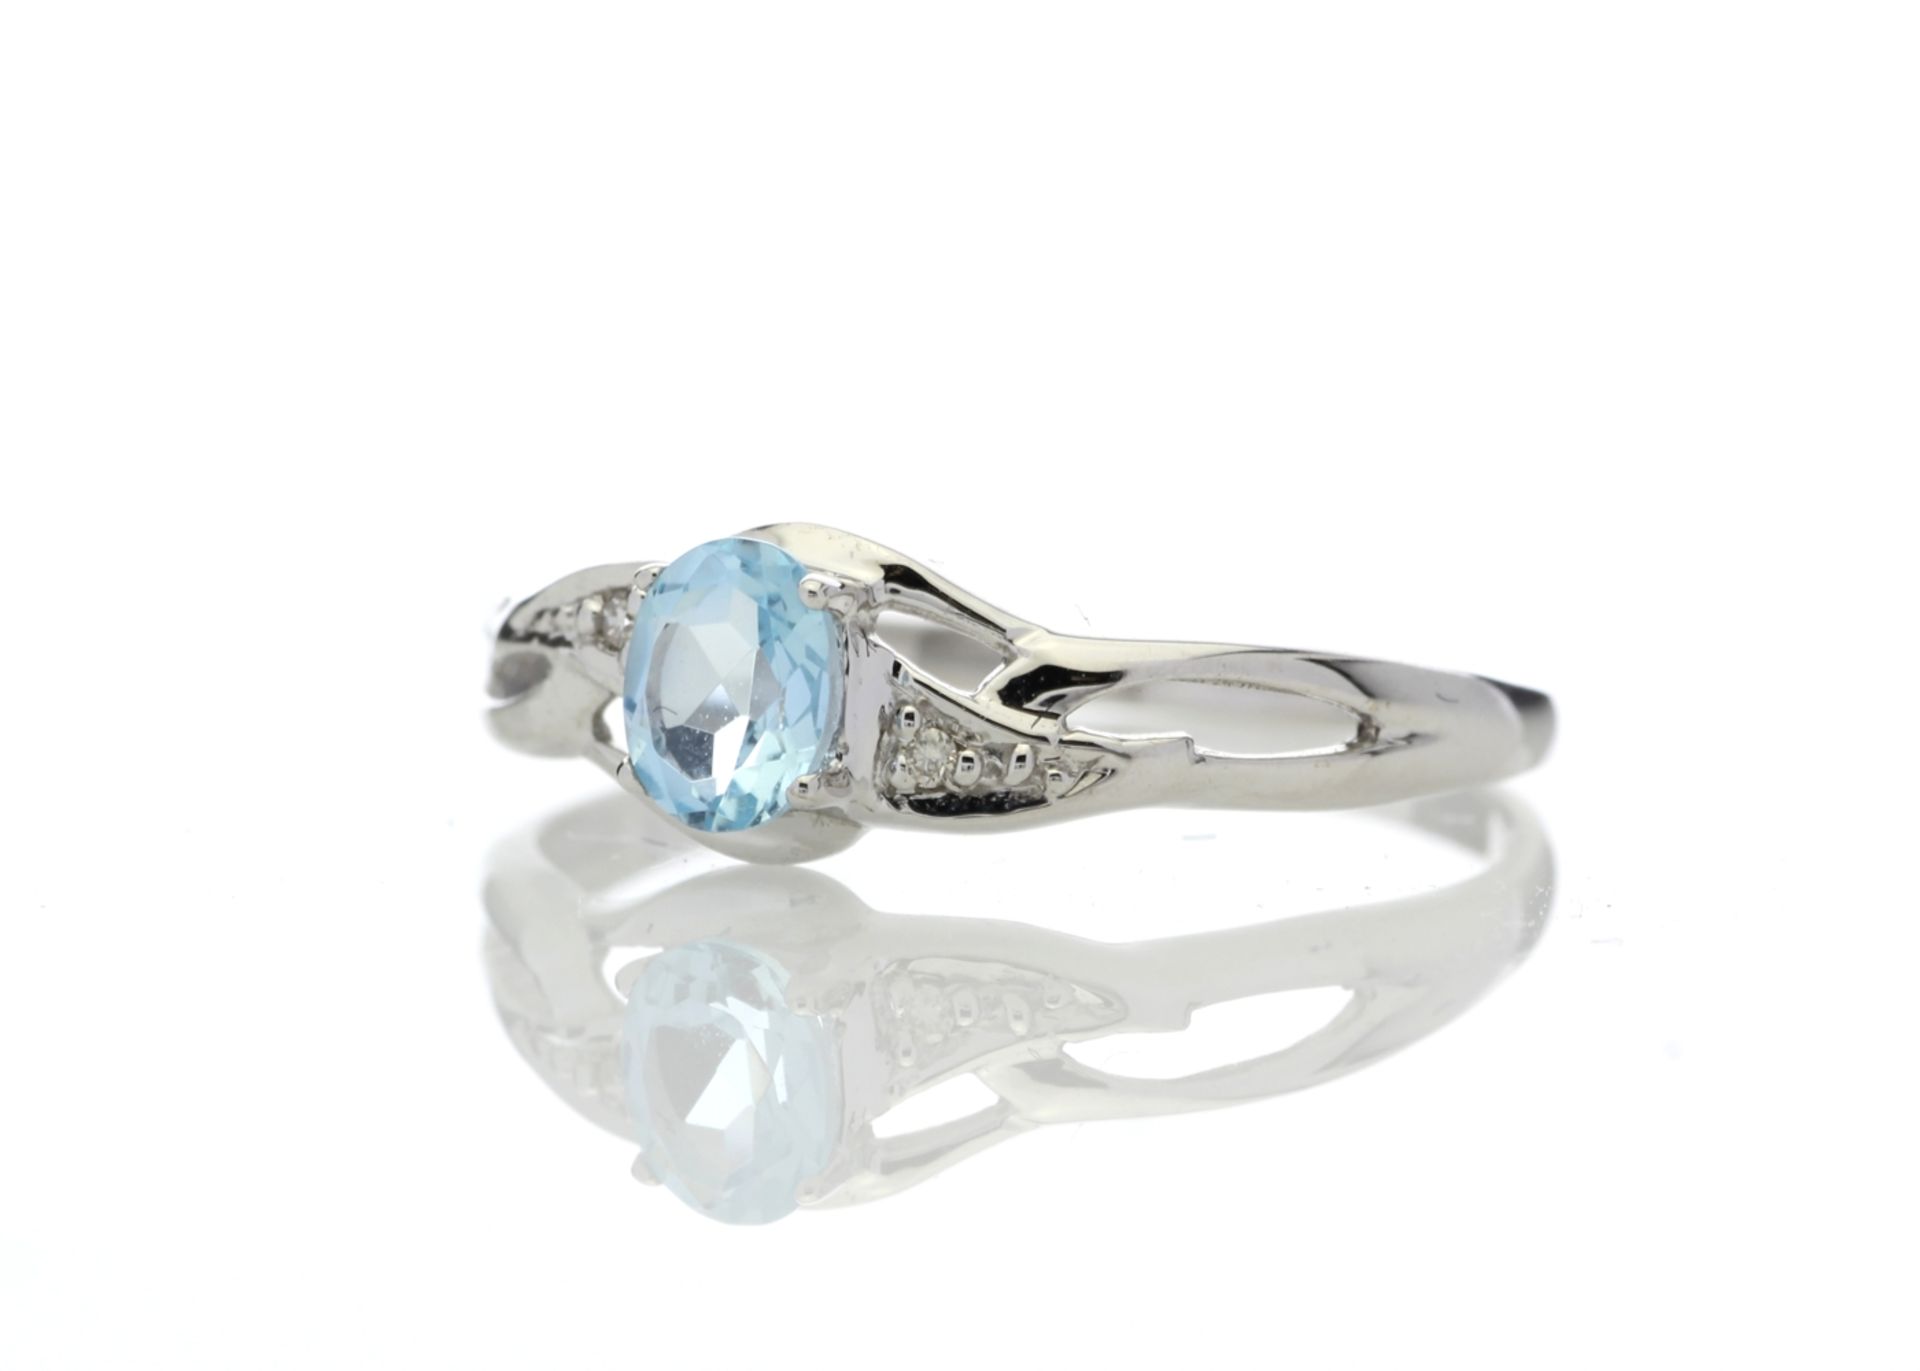 9ct White Gold Fancy Cluster Diamond And Blue Topaz Ring 0.01 Carats - Valued by GIE £609.00 - 9ct - Image 2 of 5